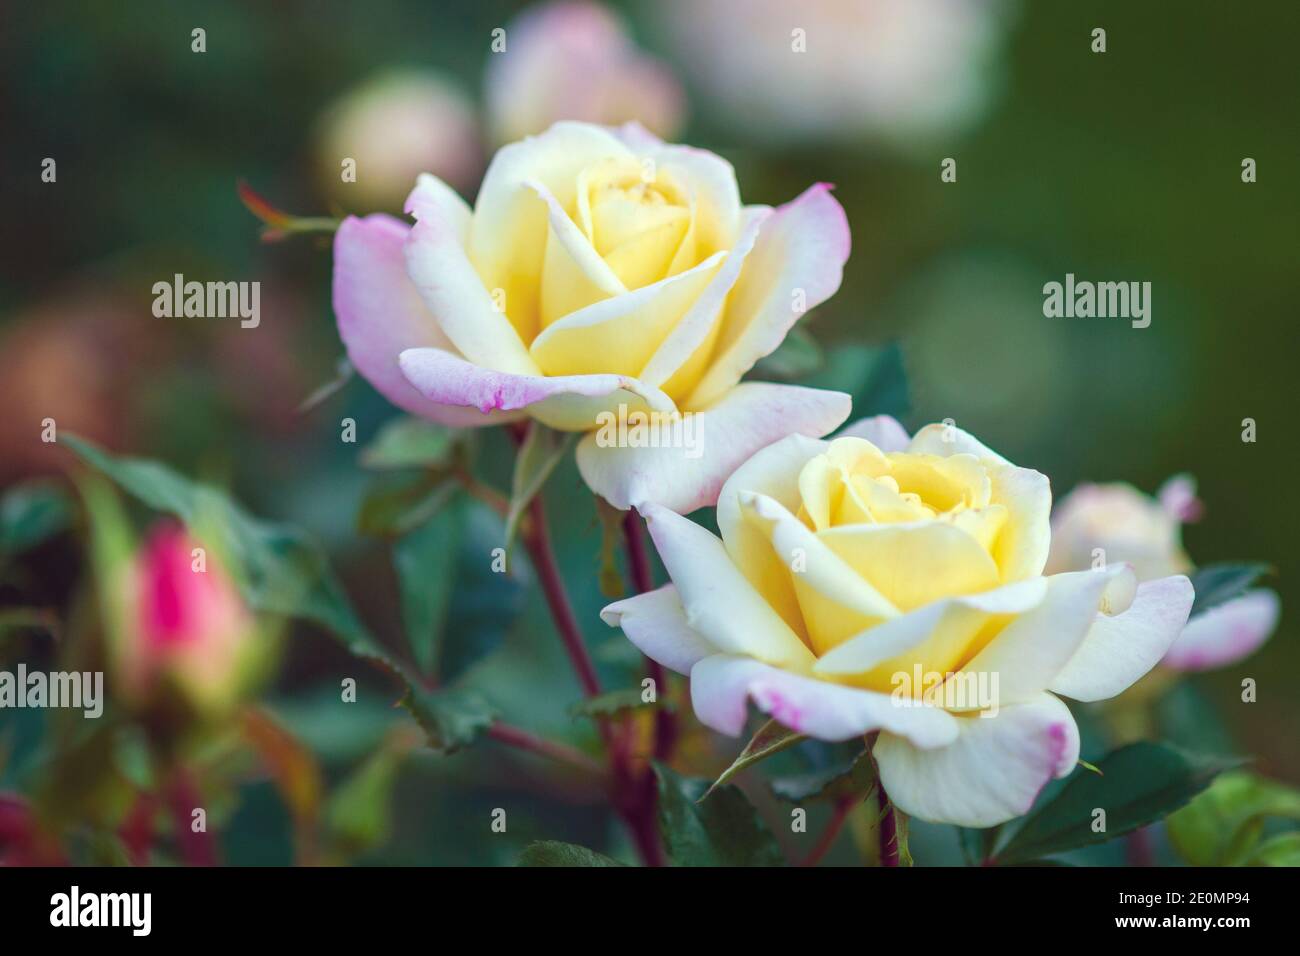 Music Box rose elegant double blossoms with creamy yellow centers and  delicate pink petals edges (modern american shrub rose by Ping Lim Stock  Photo - Alamy